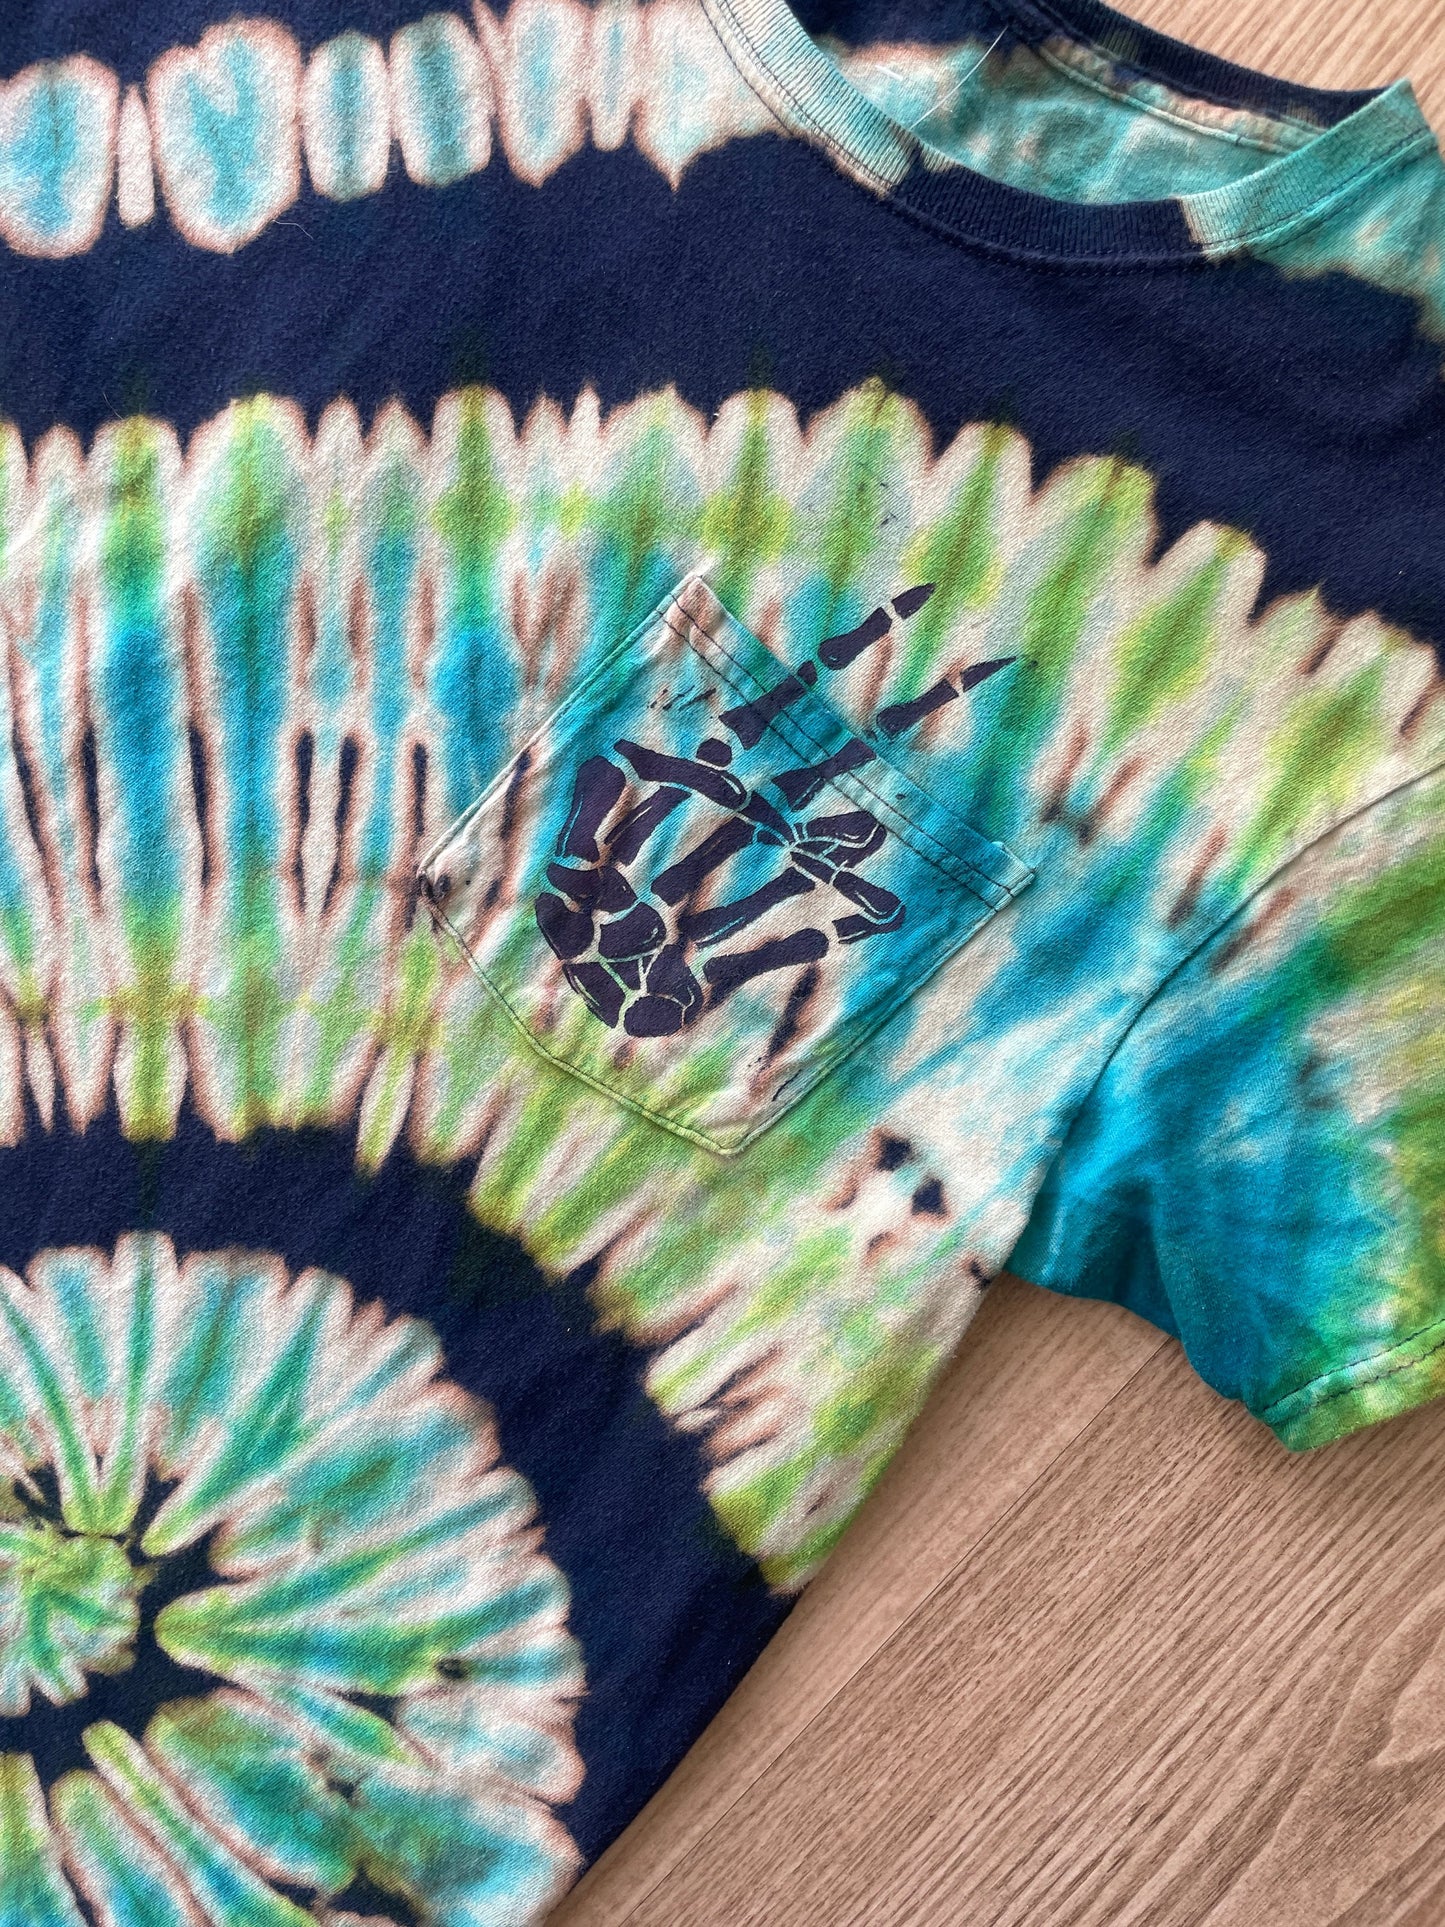 M/L Men's Hand-Printed Skeleton Peace Sign Reverse Tie Dye Short Sleeve T-Shirt | Handmade One-Of-a-Kind Upcycled Green and Blue Spiral Top